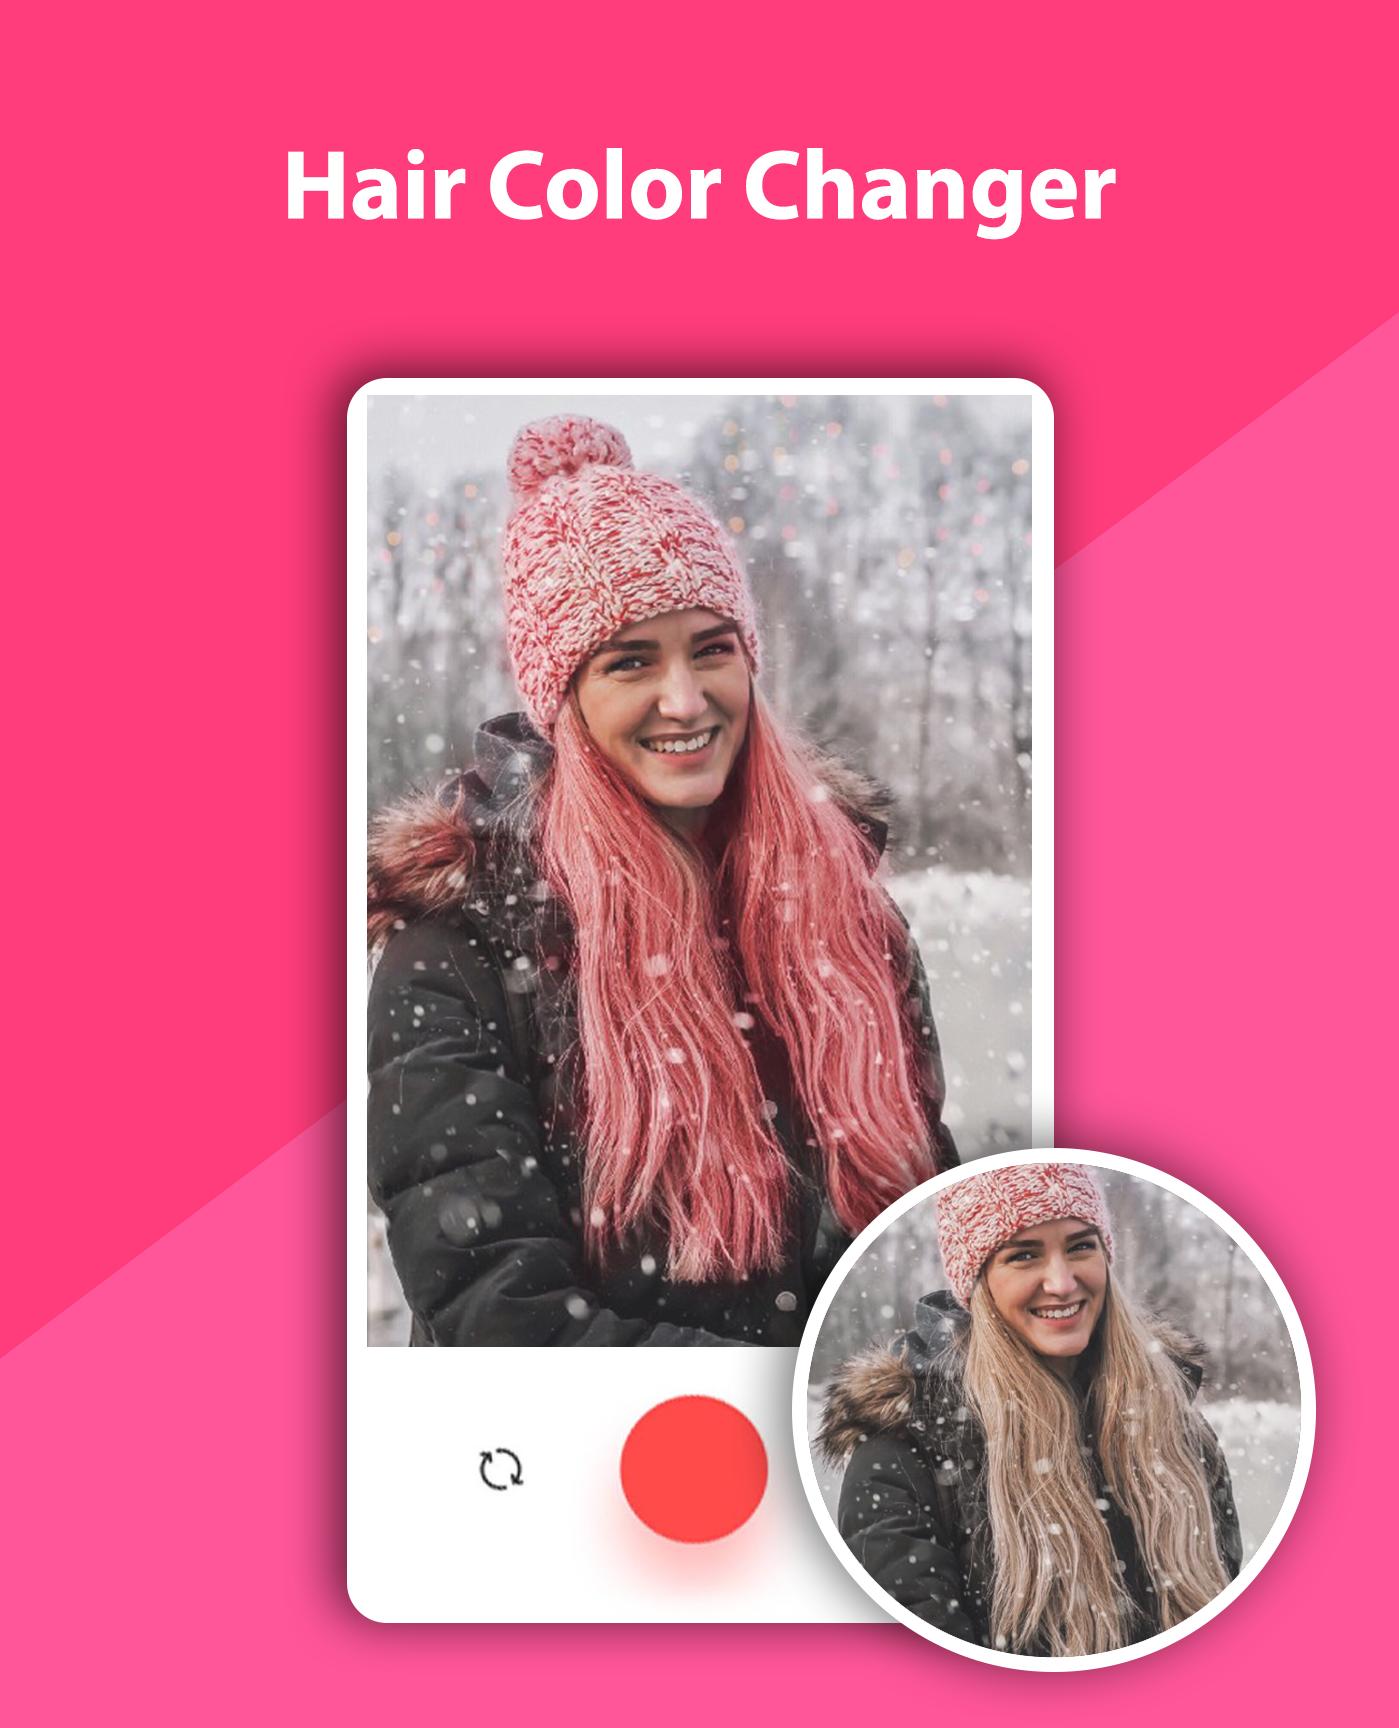 Hair color changer - Try different hair colors 1.0.0 Screenshot 6